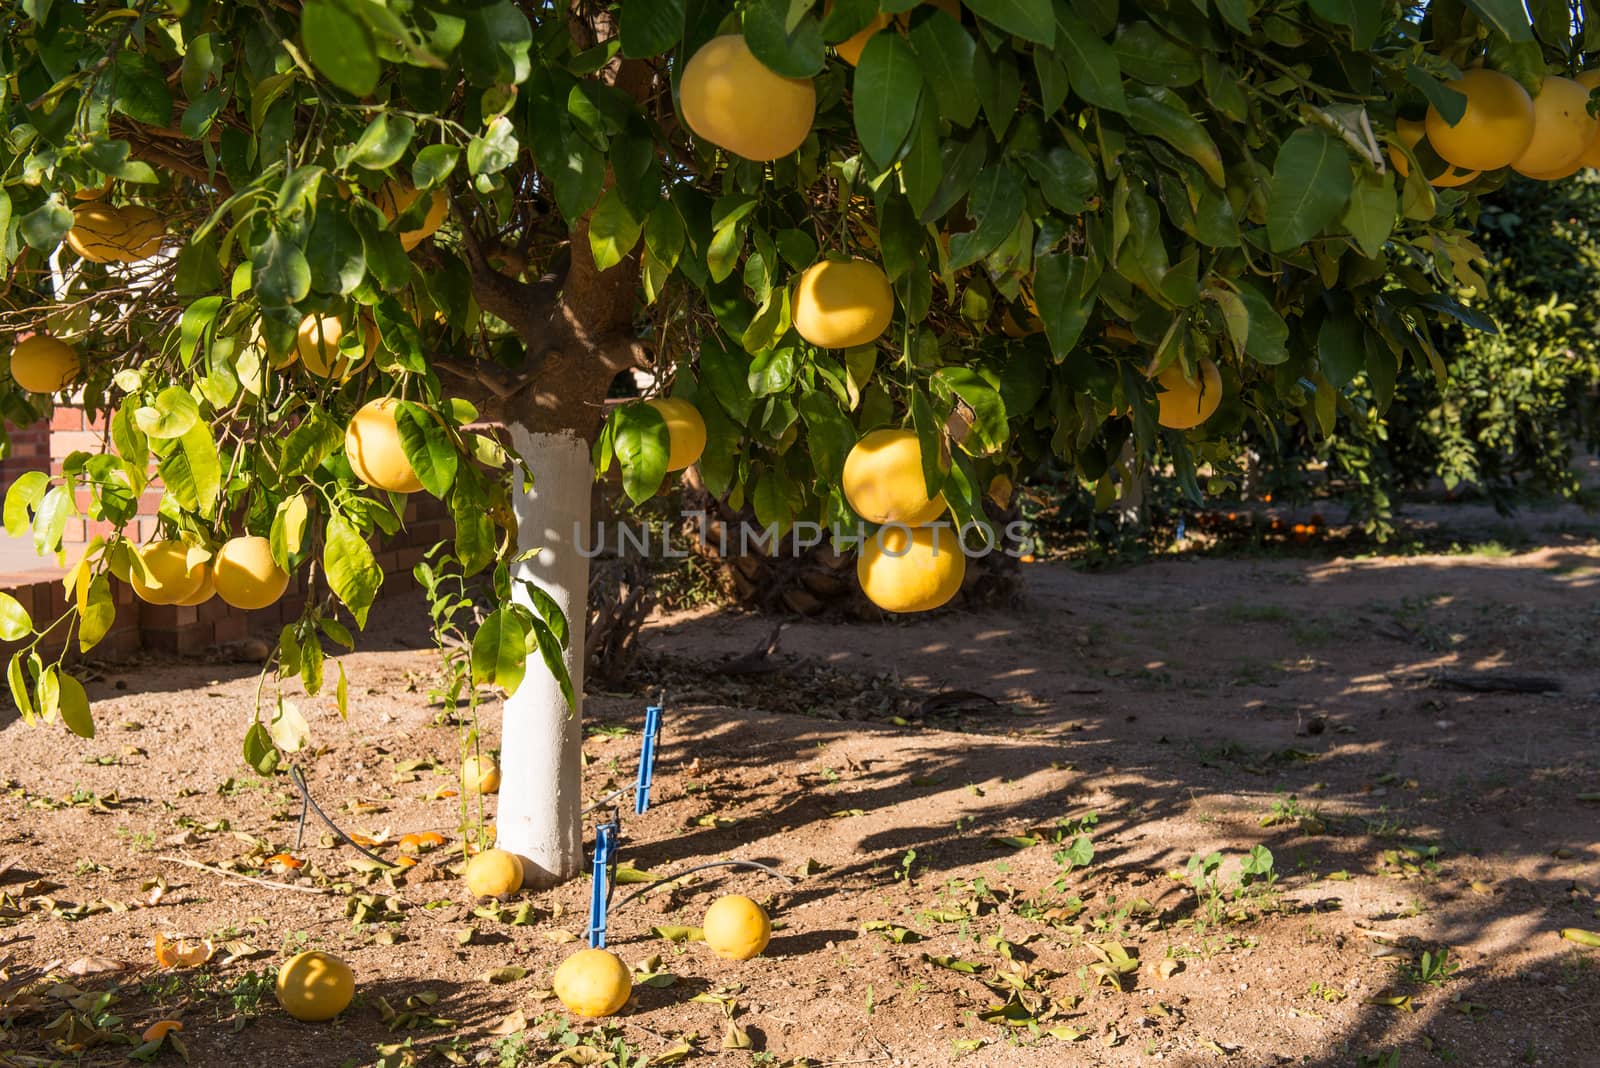 Grapefruit tree with clusters of grapefruits ready to be harvested.